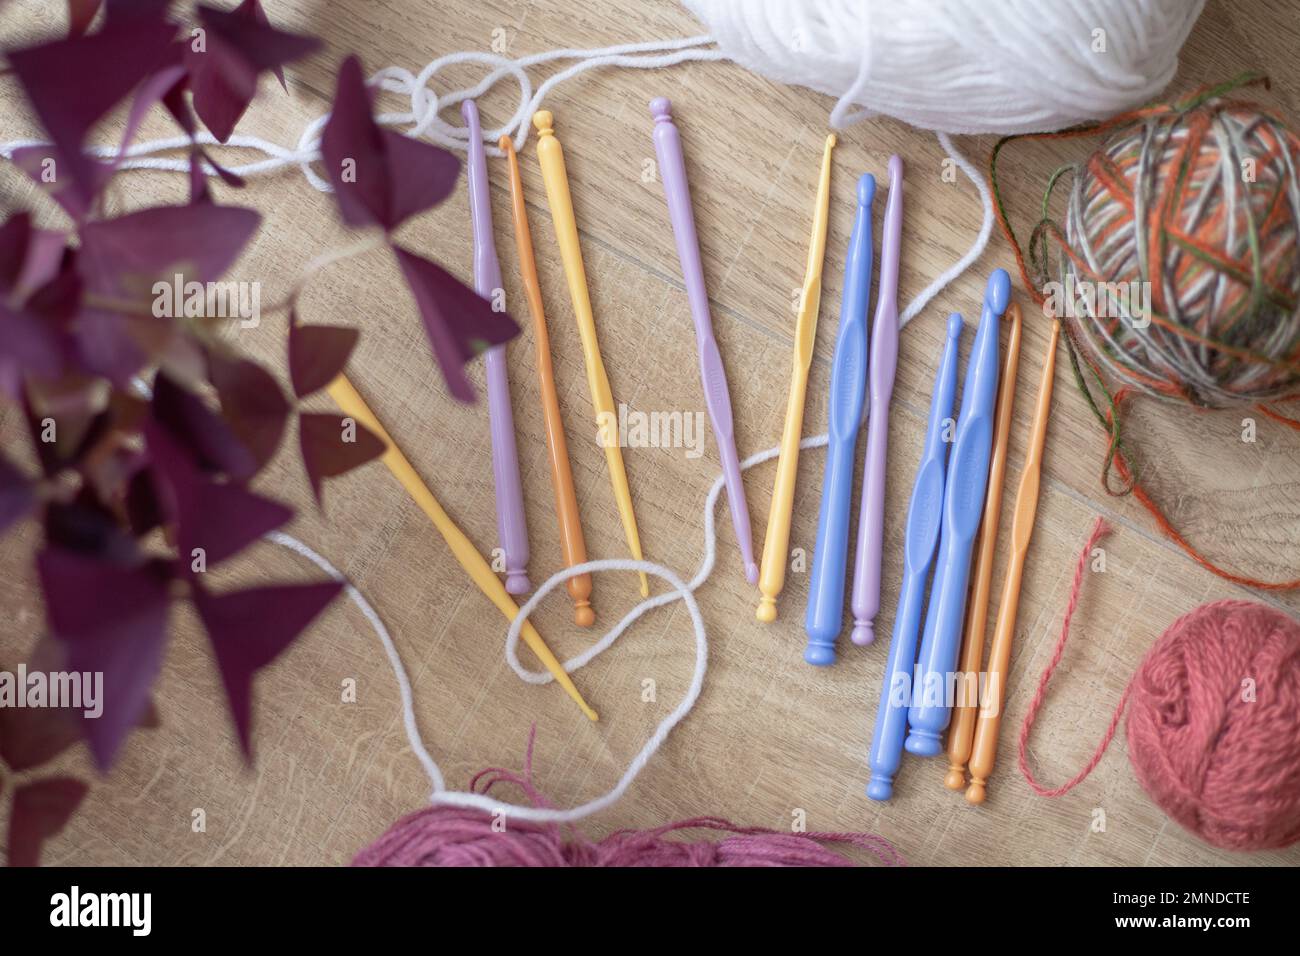 Top view of different colorful plastic crochet hooks near balls of wool, purple houseplant on wooden table. Handicraft. Stock Photo